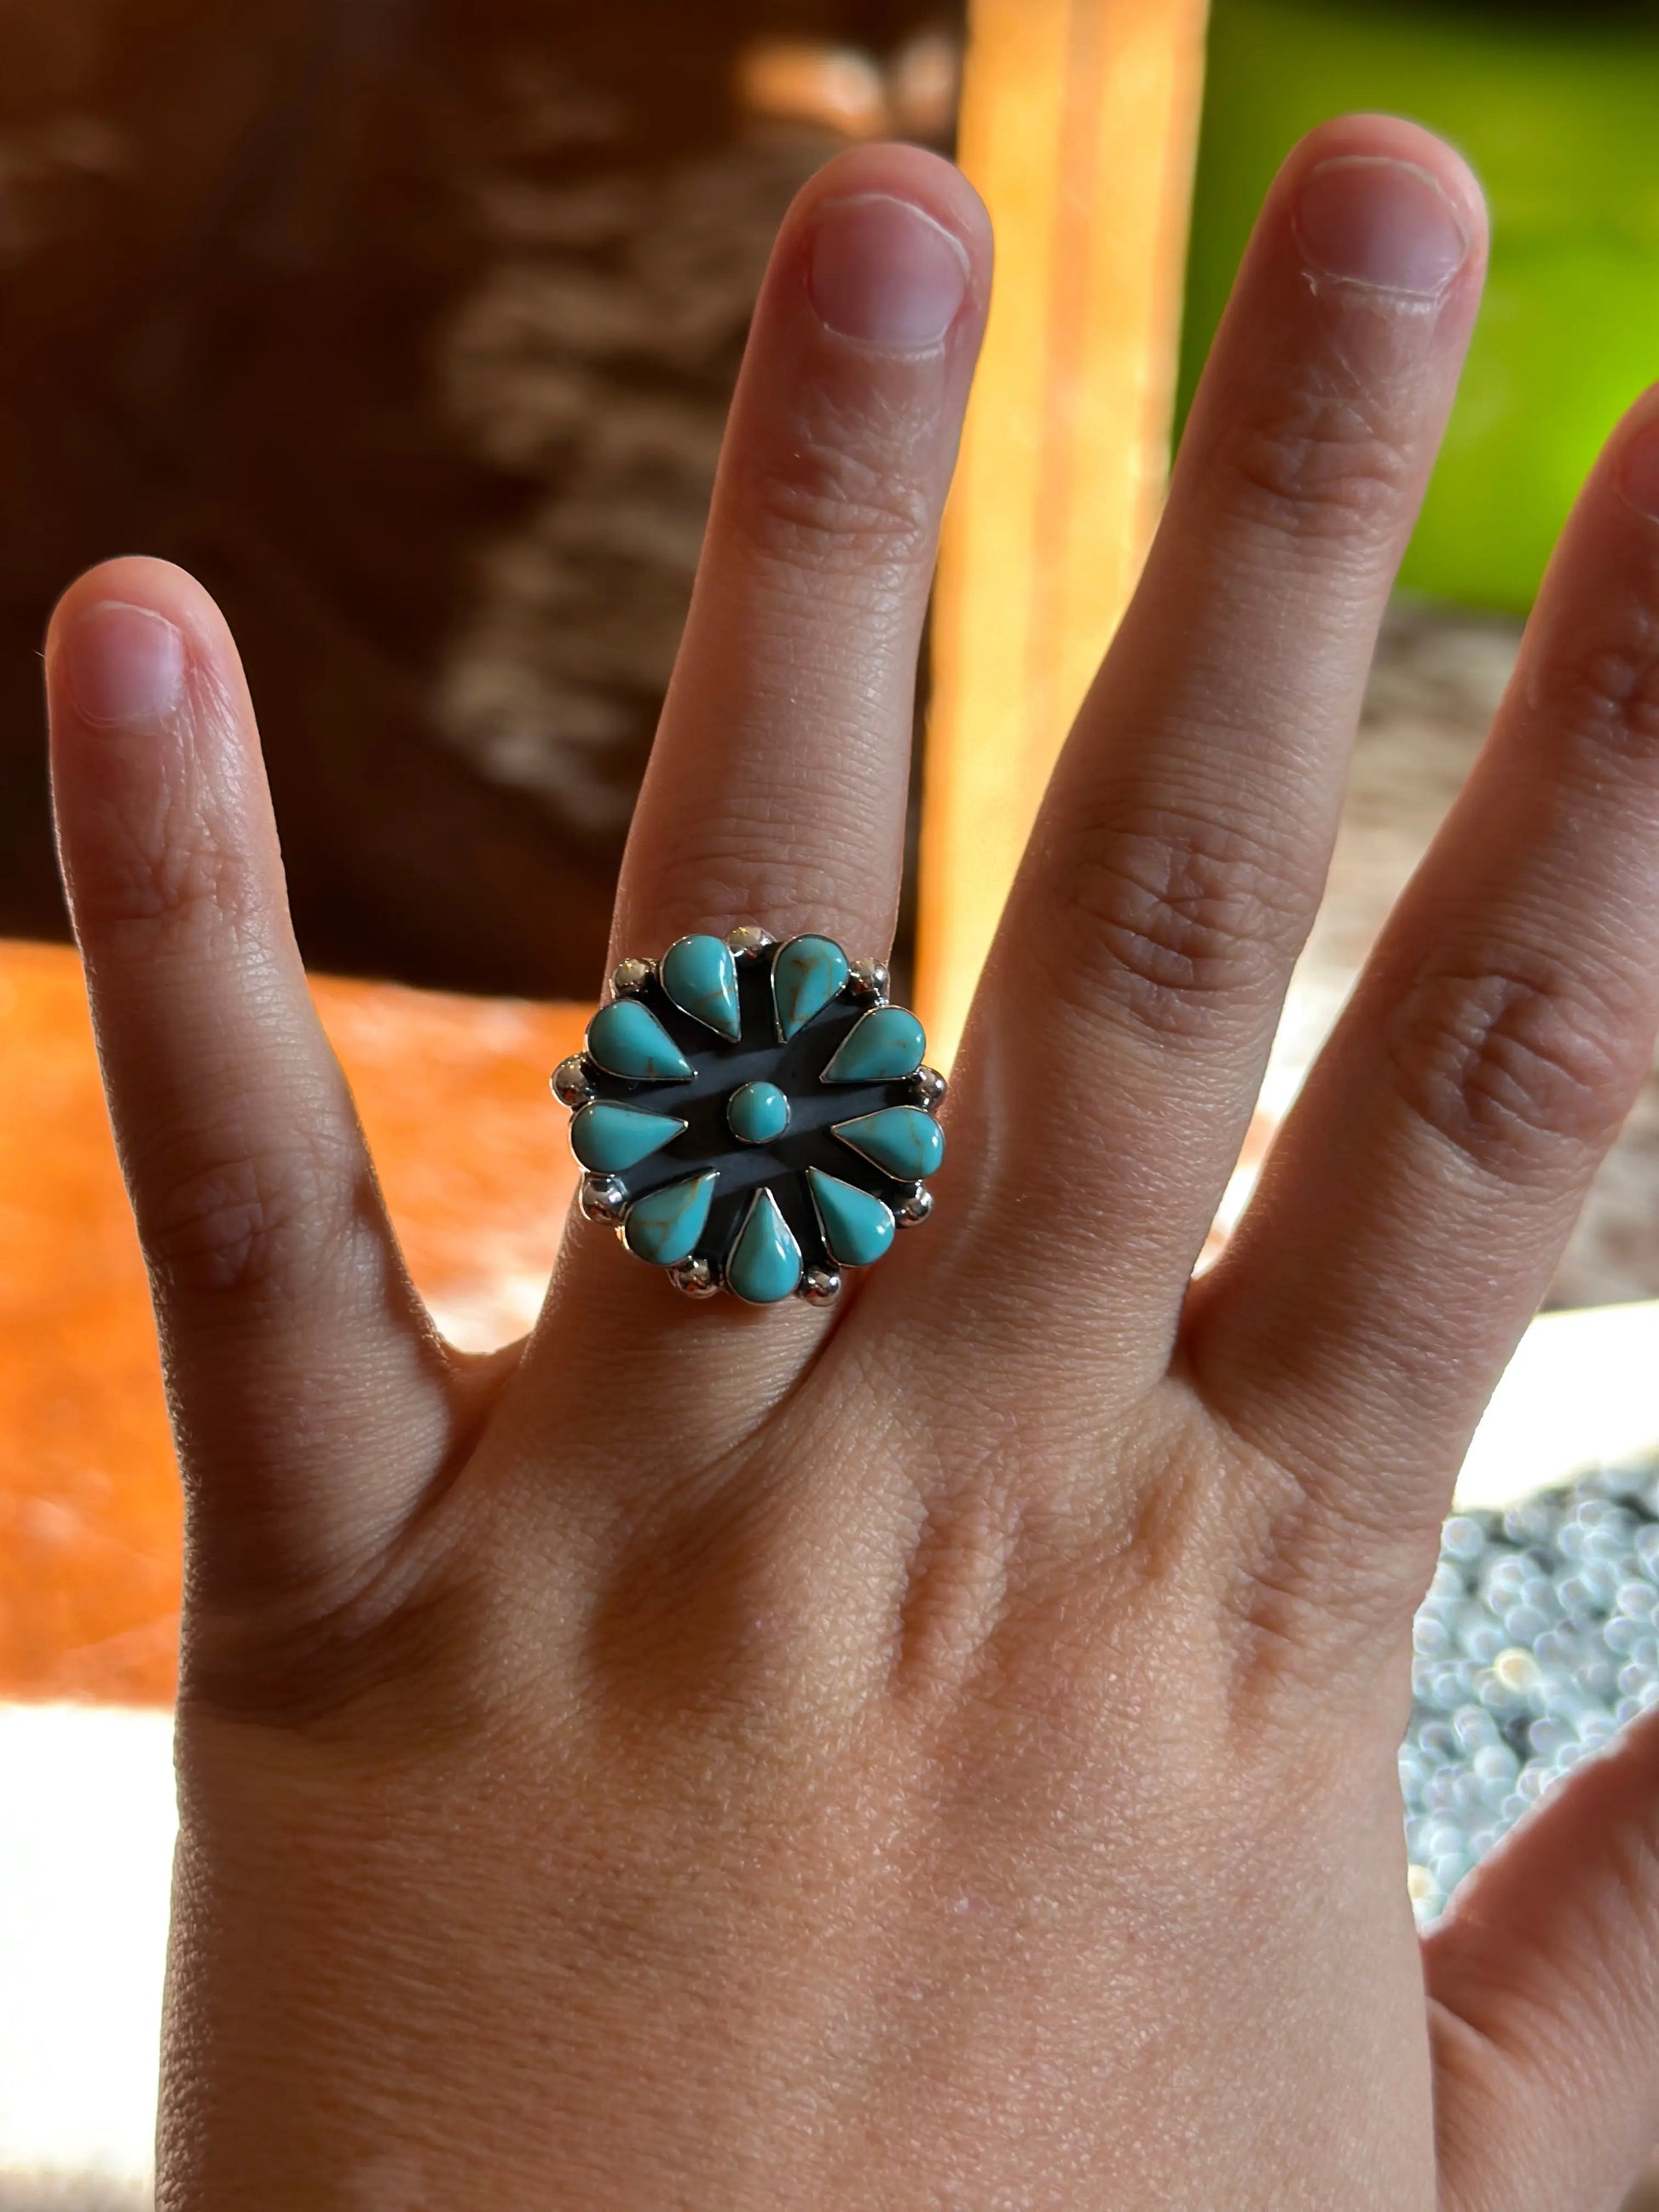 The Cluster Ring Rocking Cactus Boutique